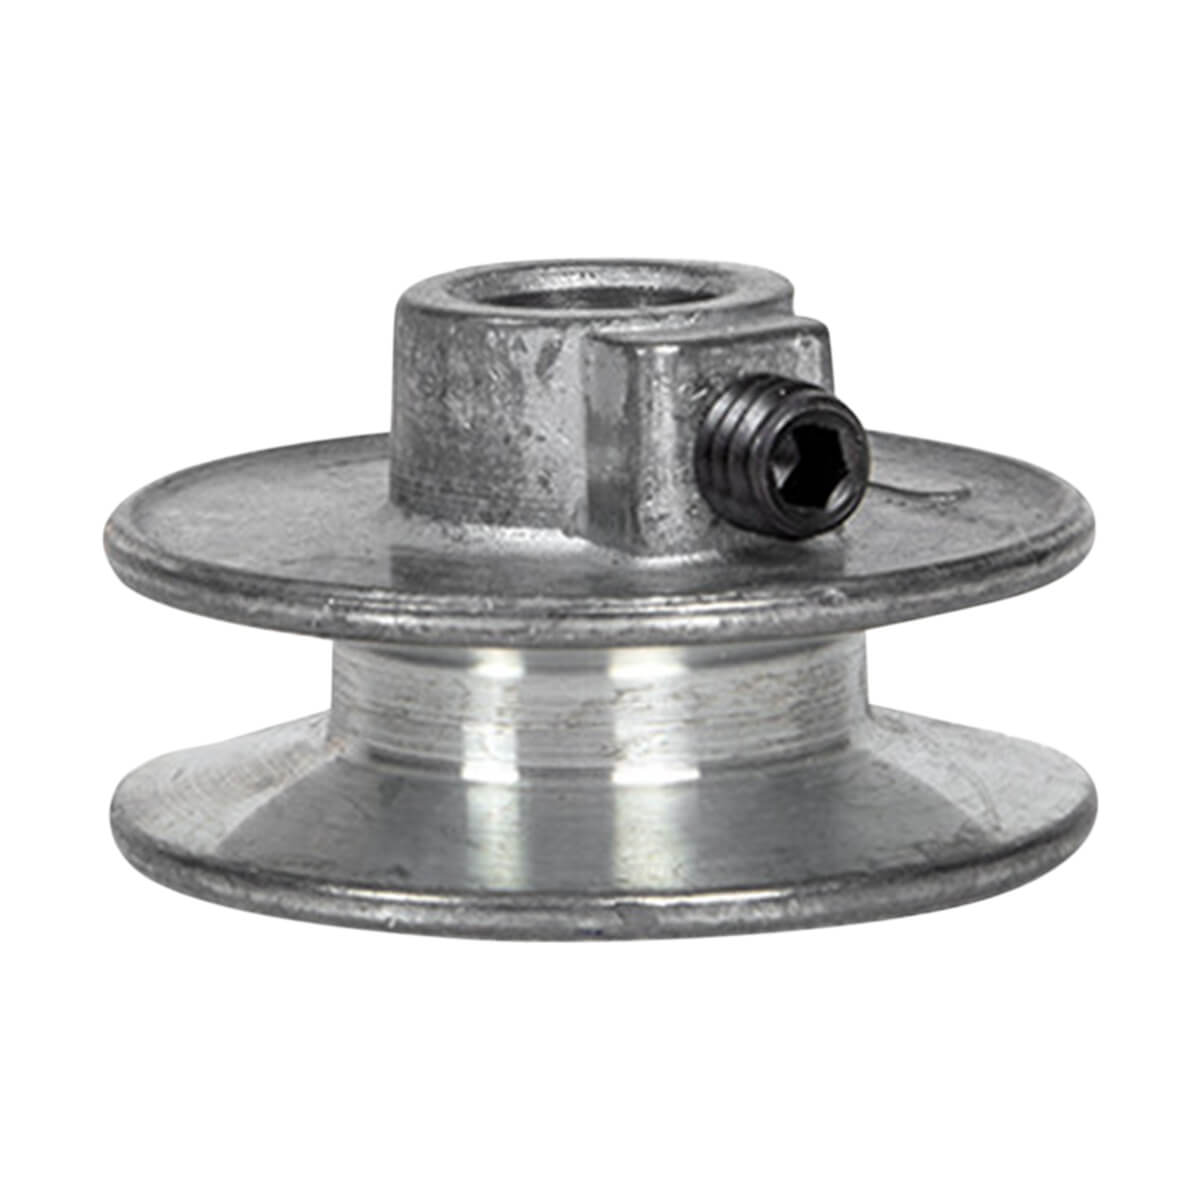 Aluminum Pulley for A-Belts - 3 1/2-in x 5/8-in